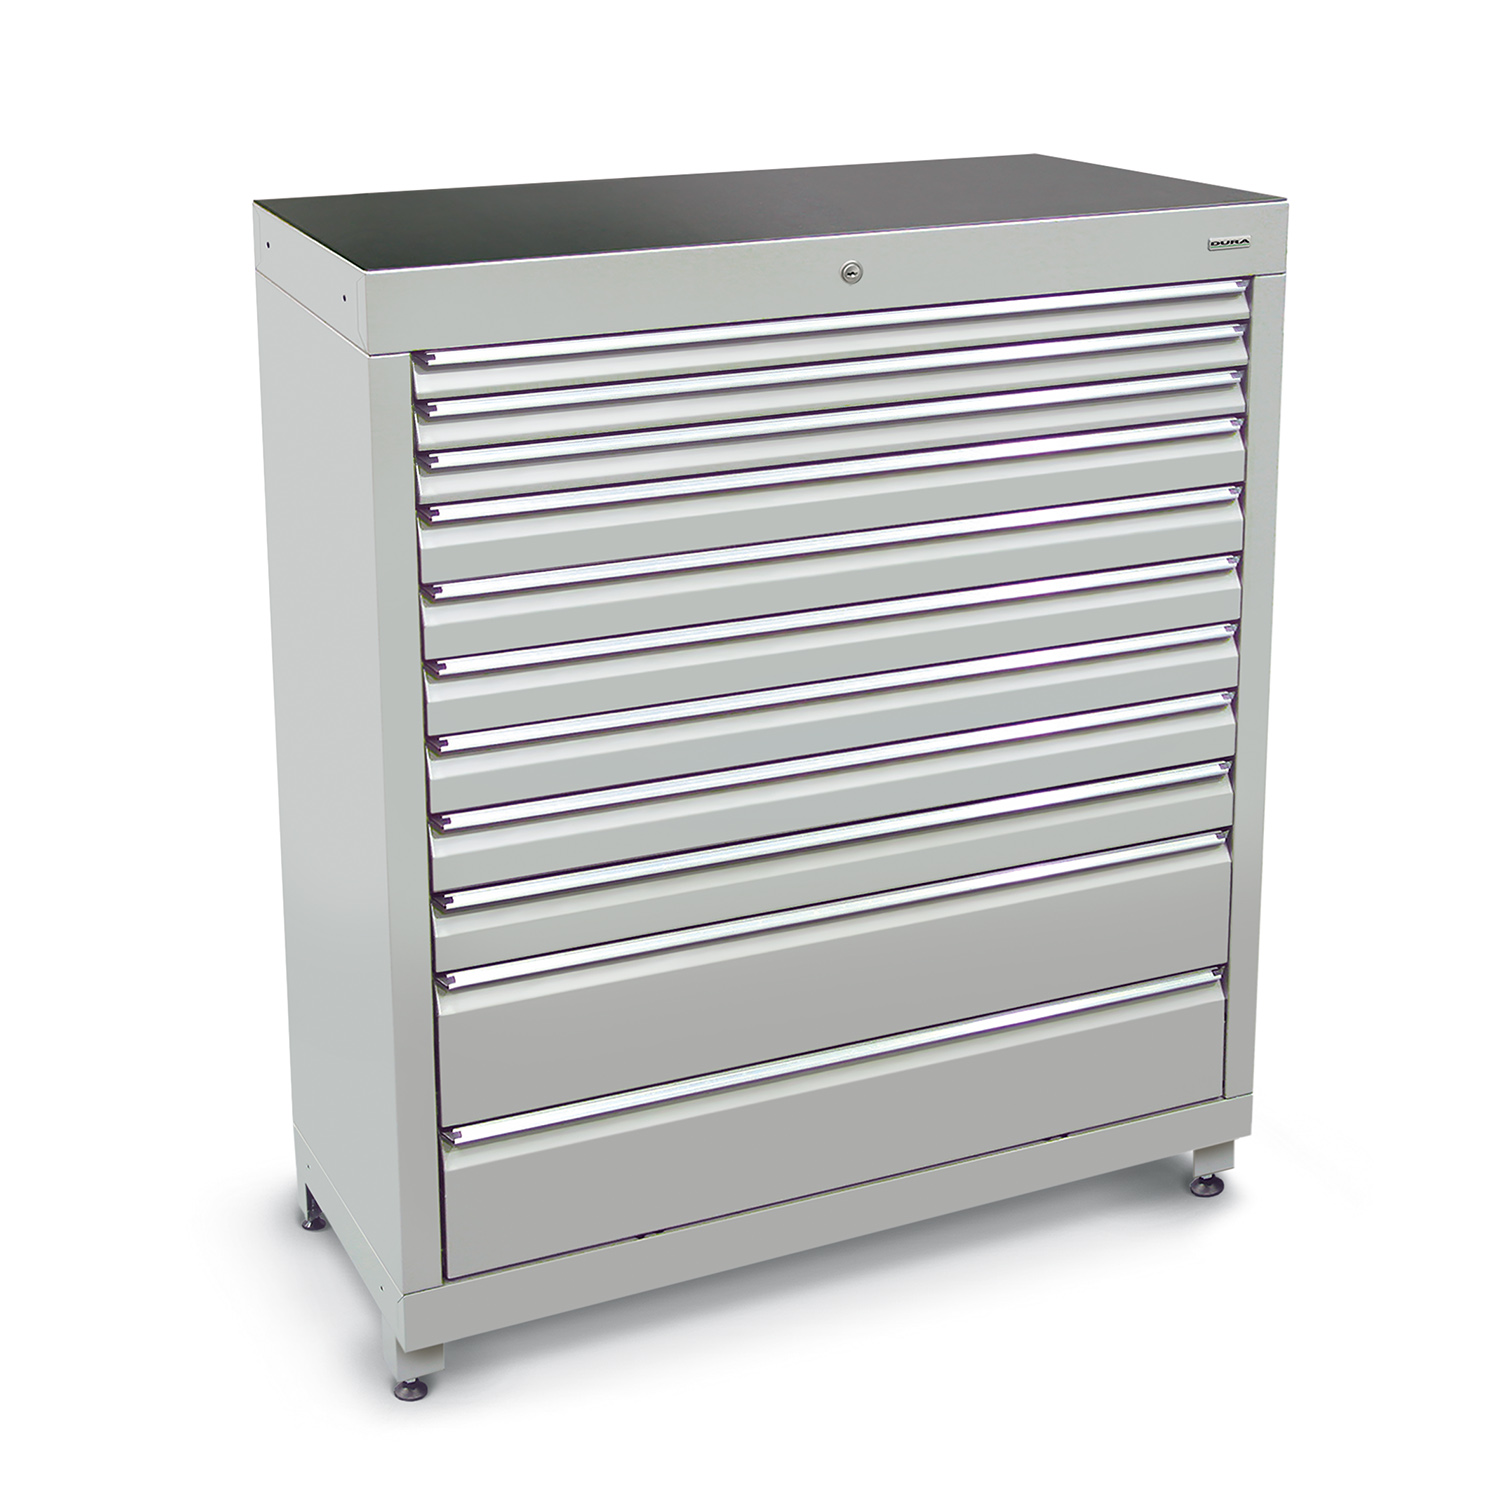 1200mm Multi-drawer high tool cabinets with 11 drawers (3 slim, 6 medium, 2 large) and feet